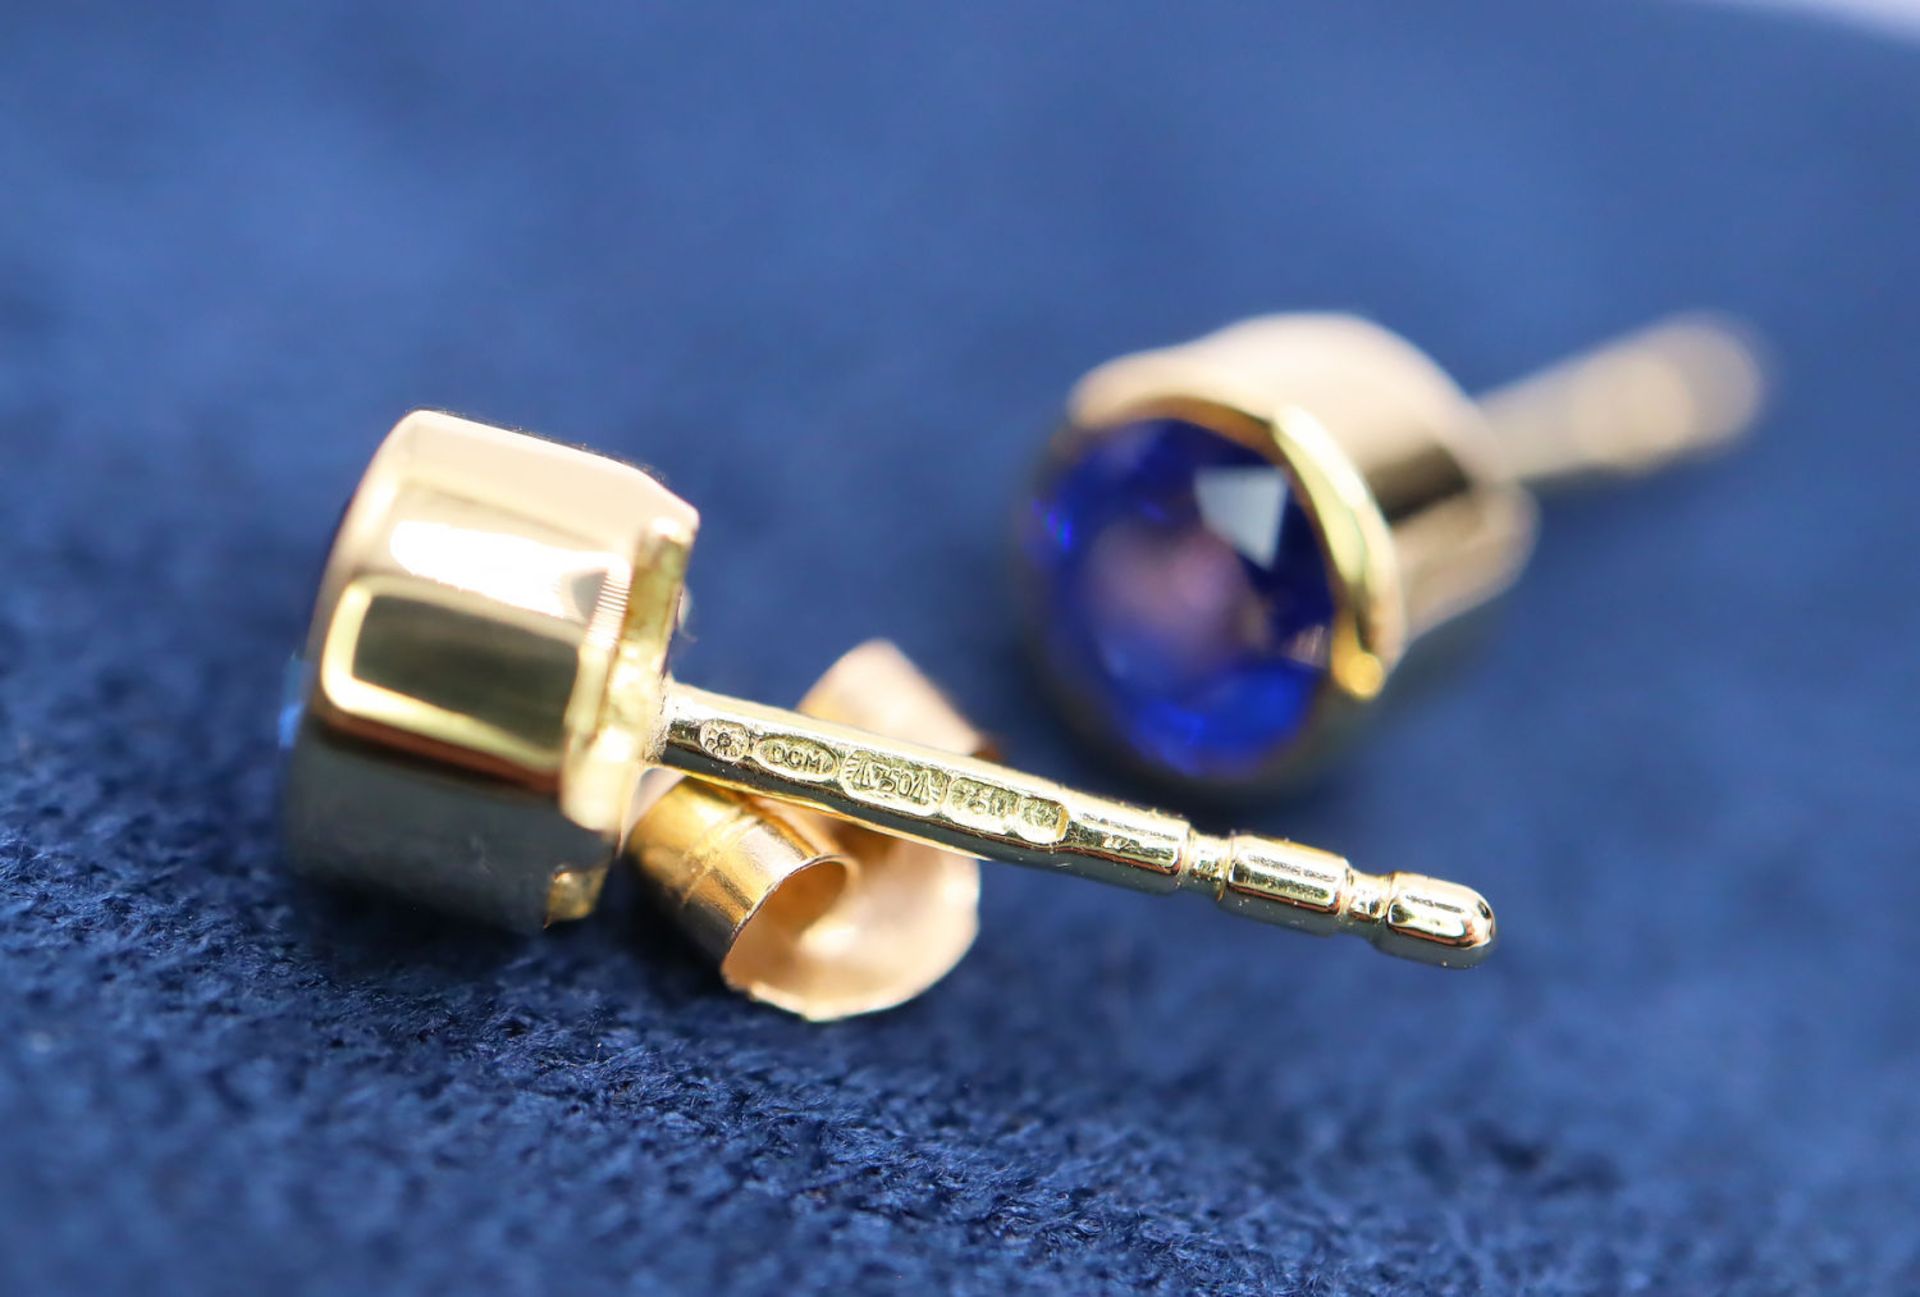 *BEAUTIFUL* 1.30CT BRIGHT BLUE SAPPHIRE STUD EARRINGS SET IN 18K YELLOW GOLD - Image 4 of 4